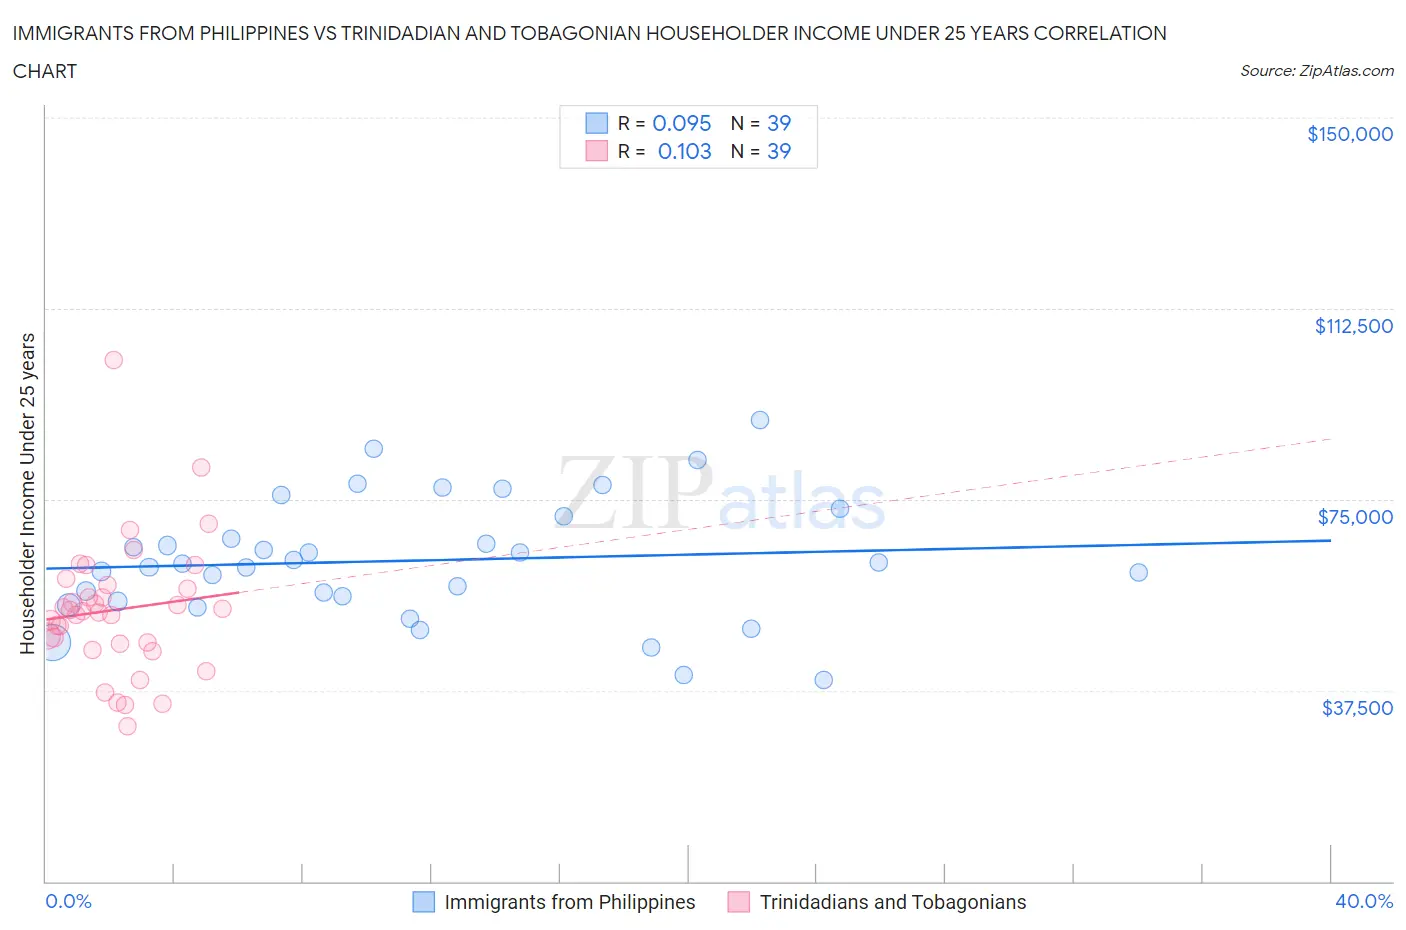 Immigrants from Philippines vs Trinidadian and Tobagonian Householder Income Under 25 years